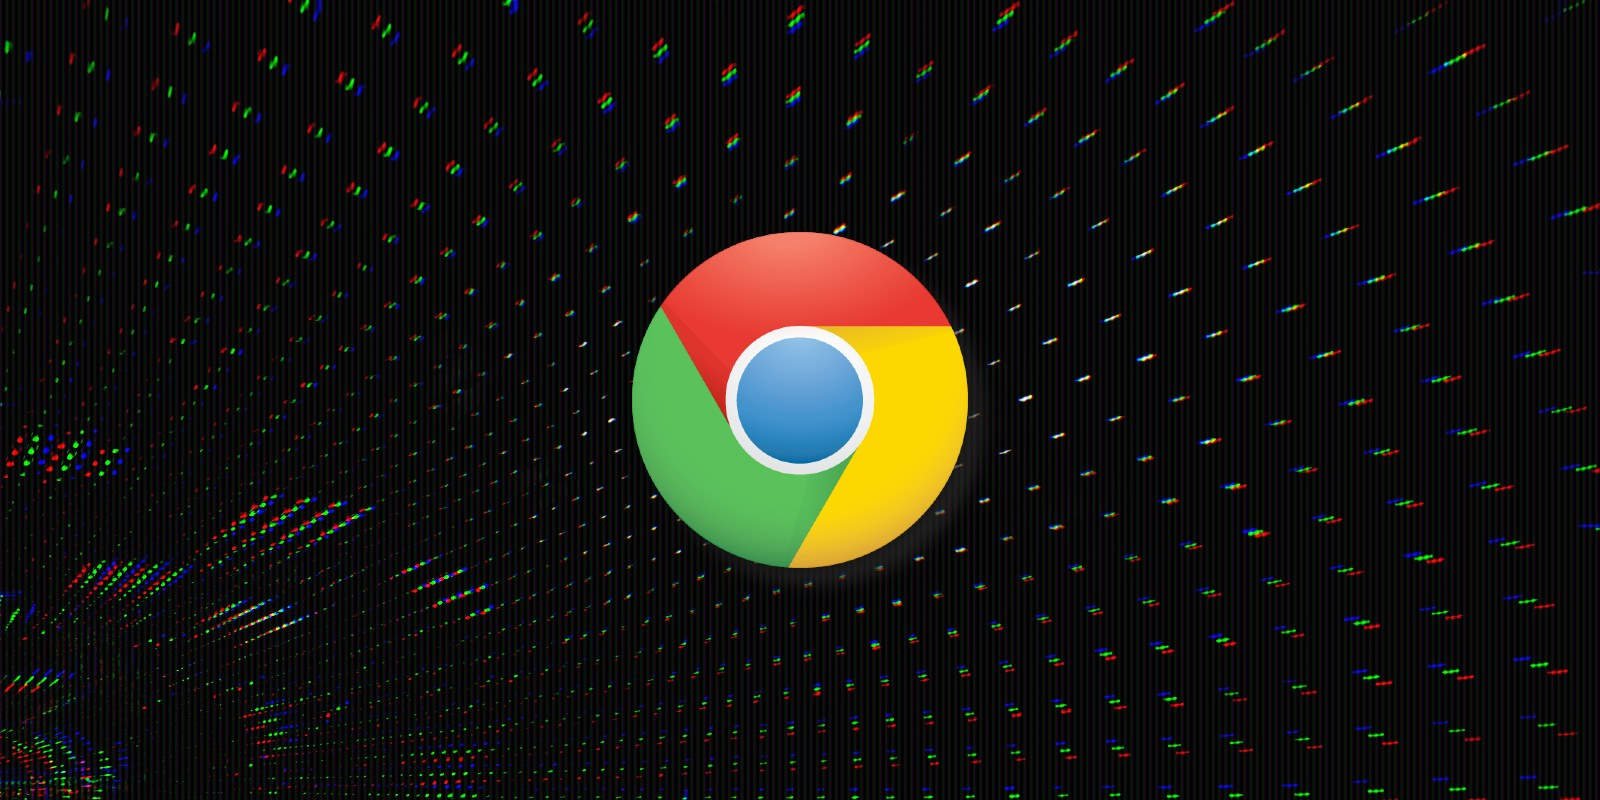 Google fixes sixth Chrome zero-day exploited in the wild this year